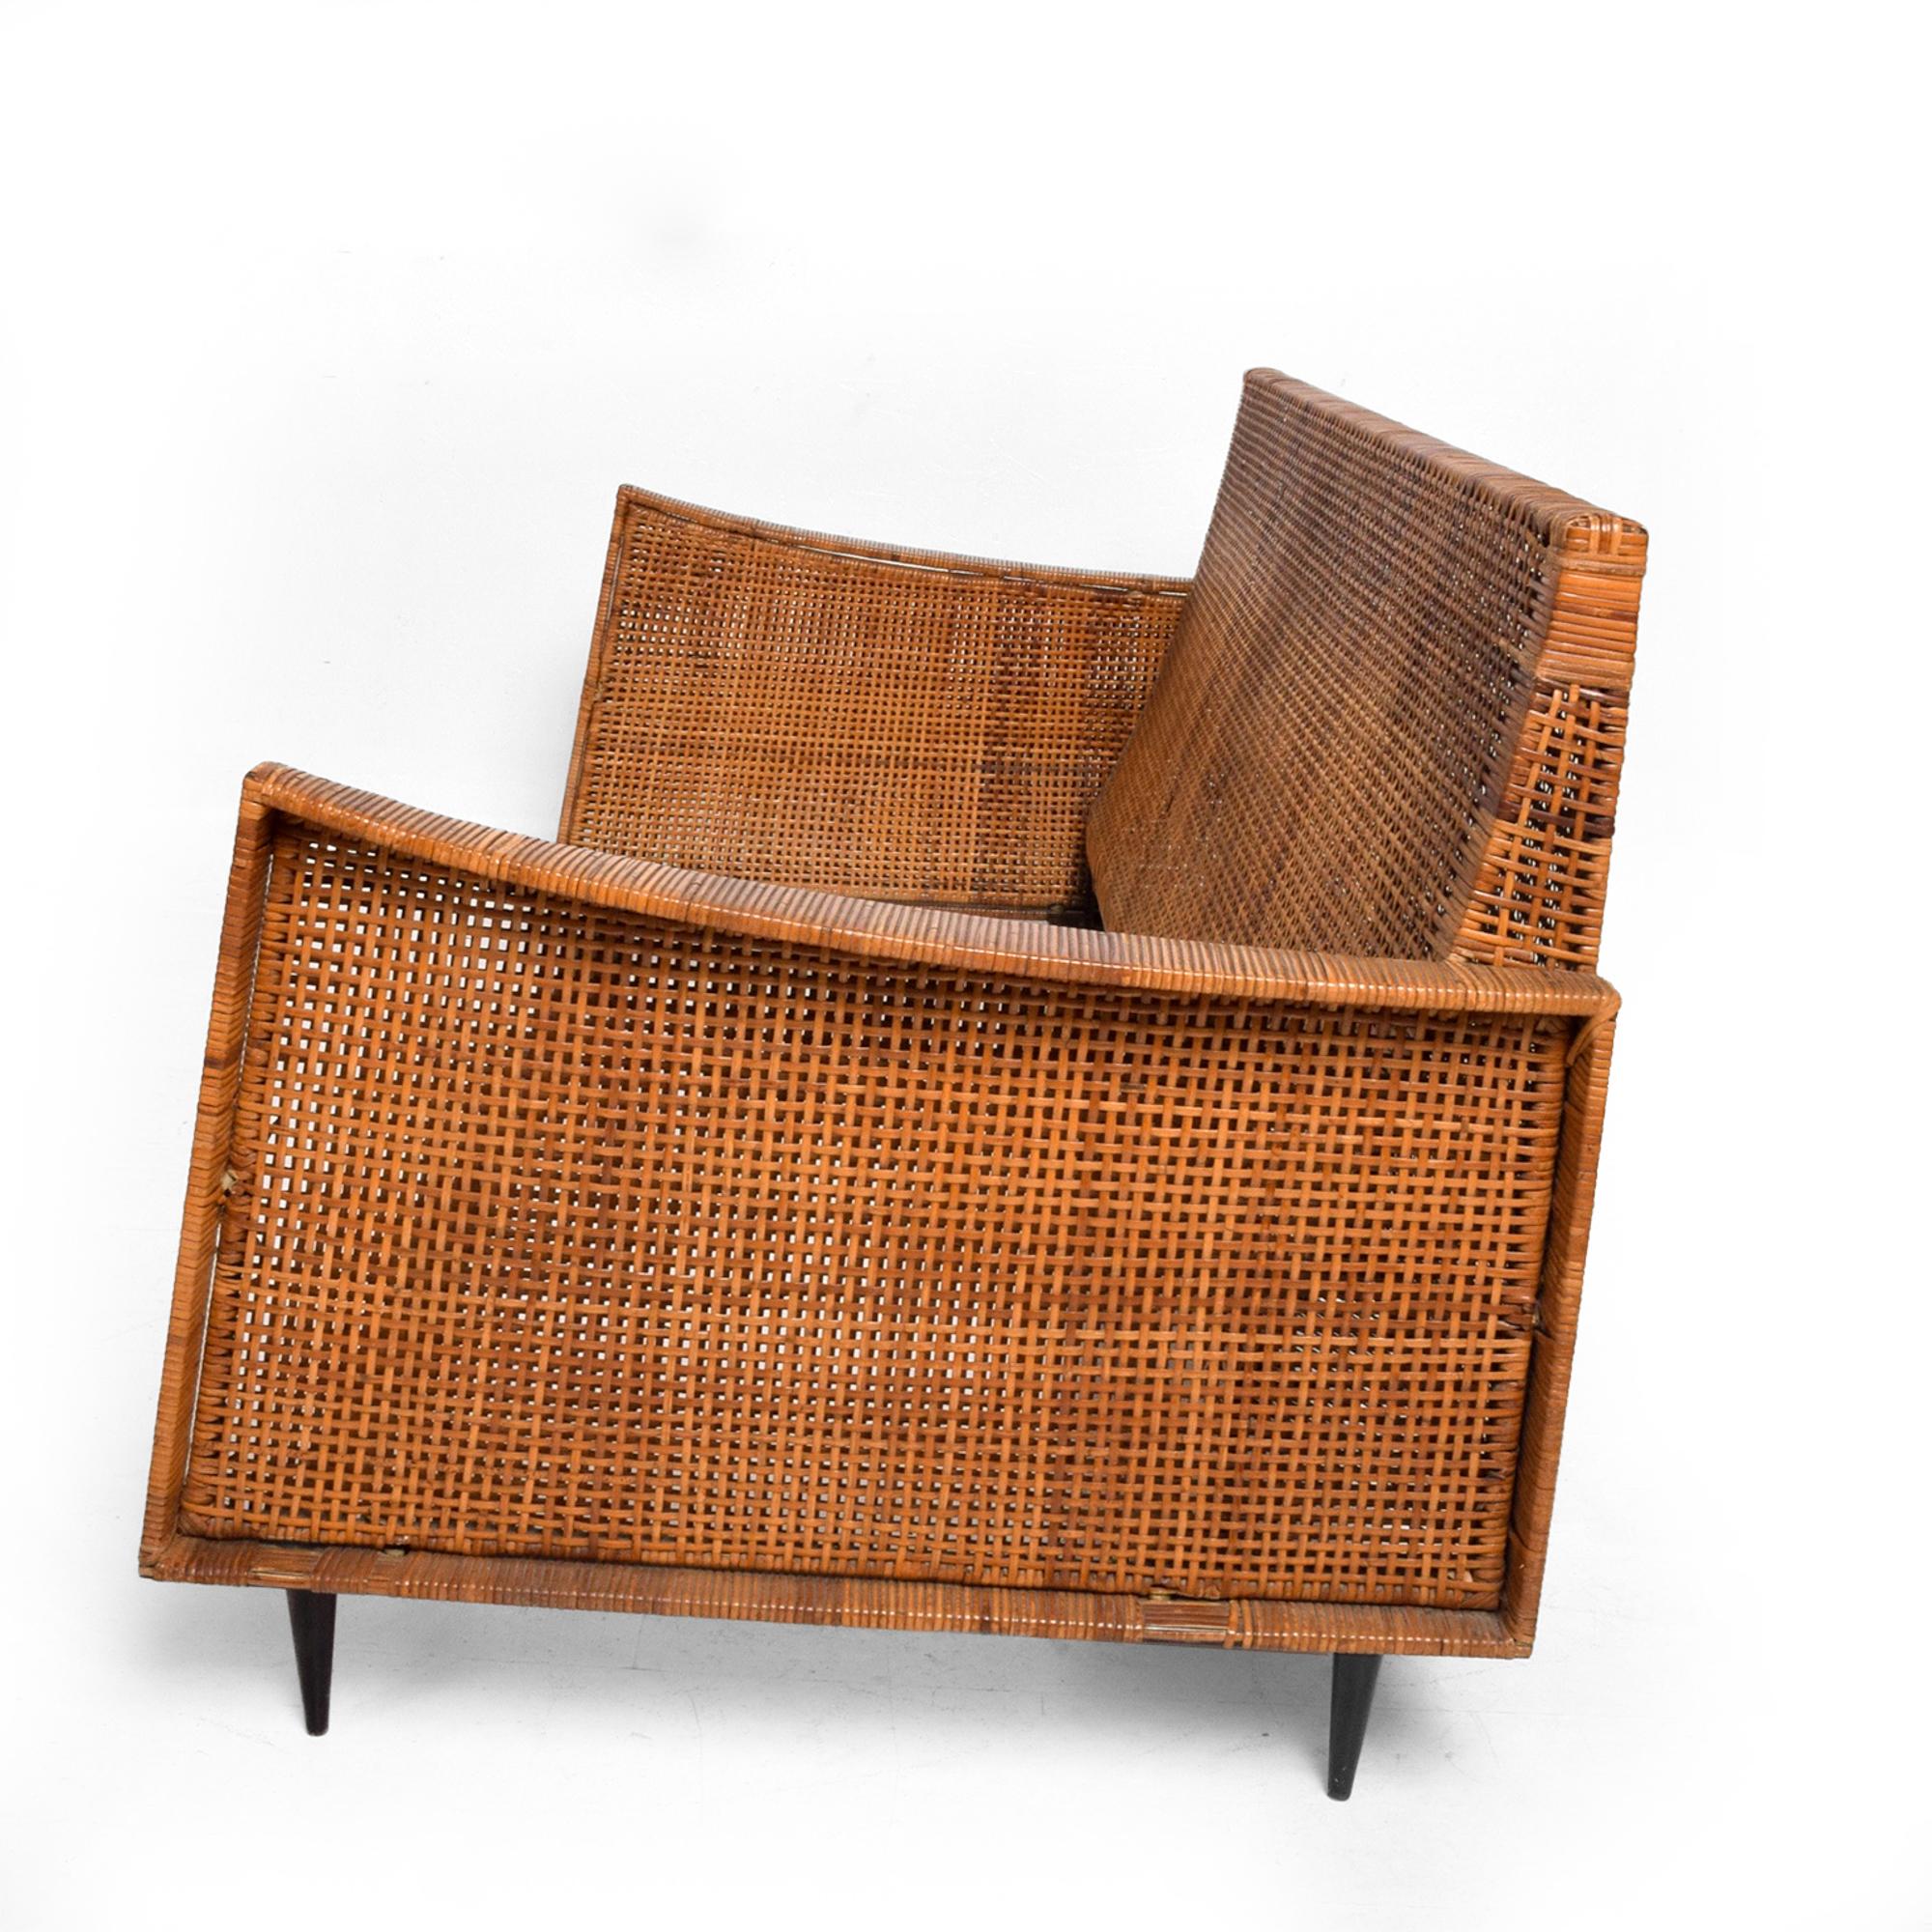 Vintage modern Cane loveseat sofa settee (material woven wood wicker)
Mexico, circa 1960s
Attribution to midcentury Mexican Modernist Arturo Pani.
Loveseat with pronounced clean sculptural lines -sits on a solid steel frame covered in cane-very